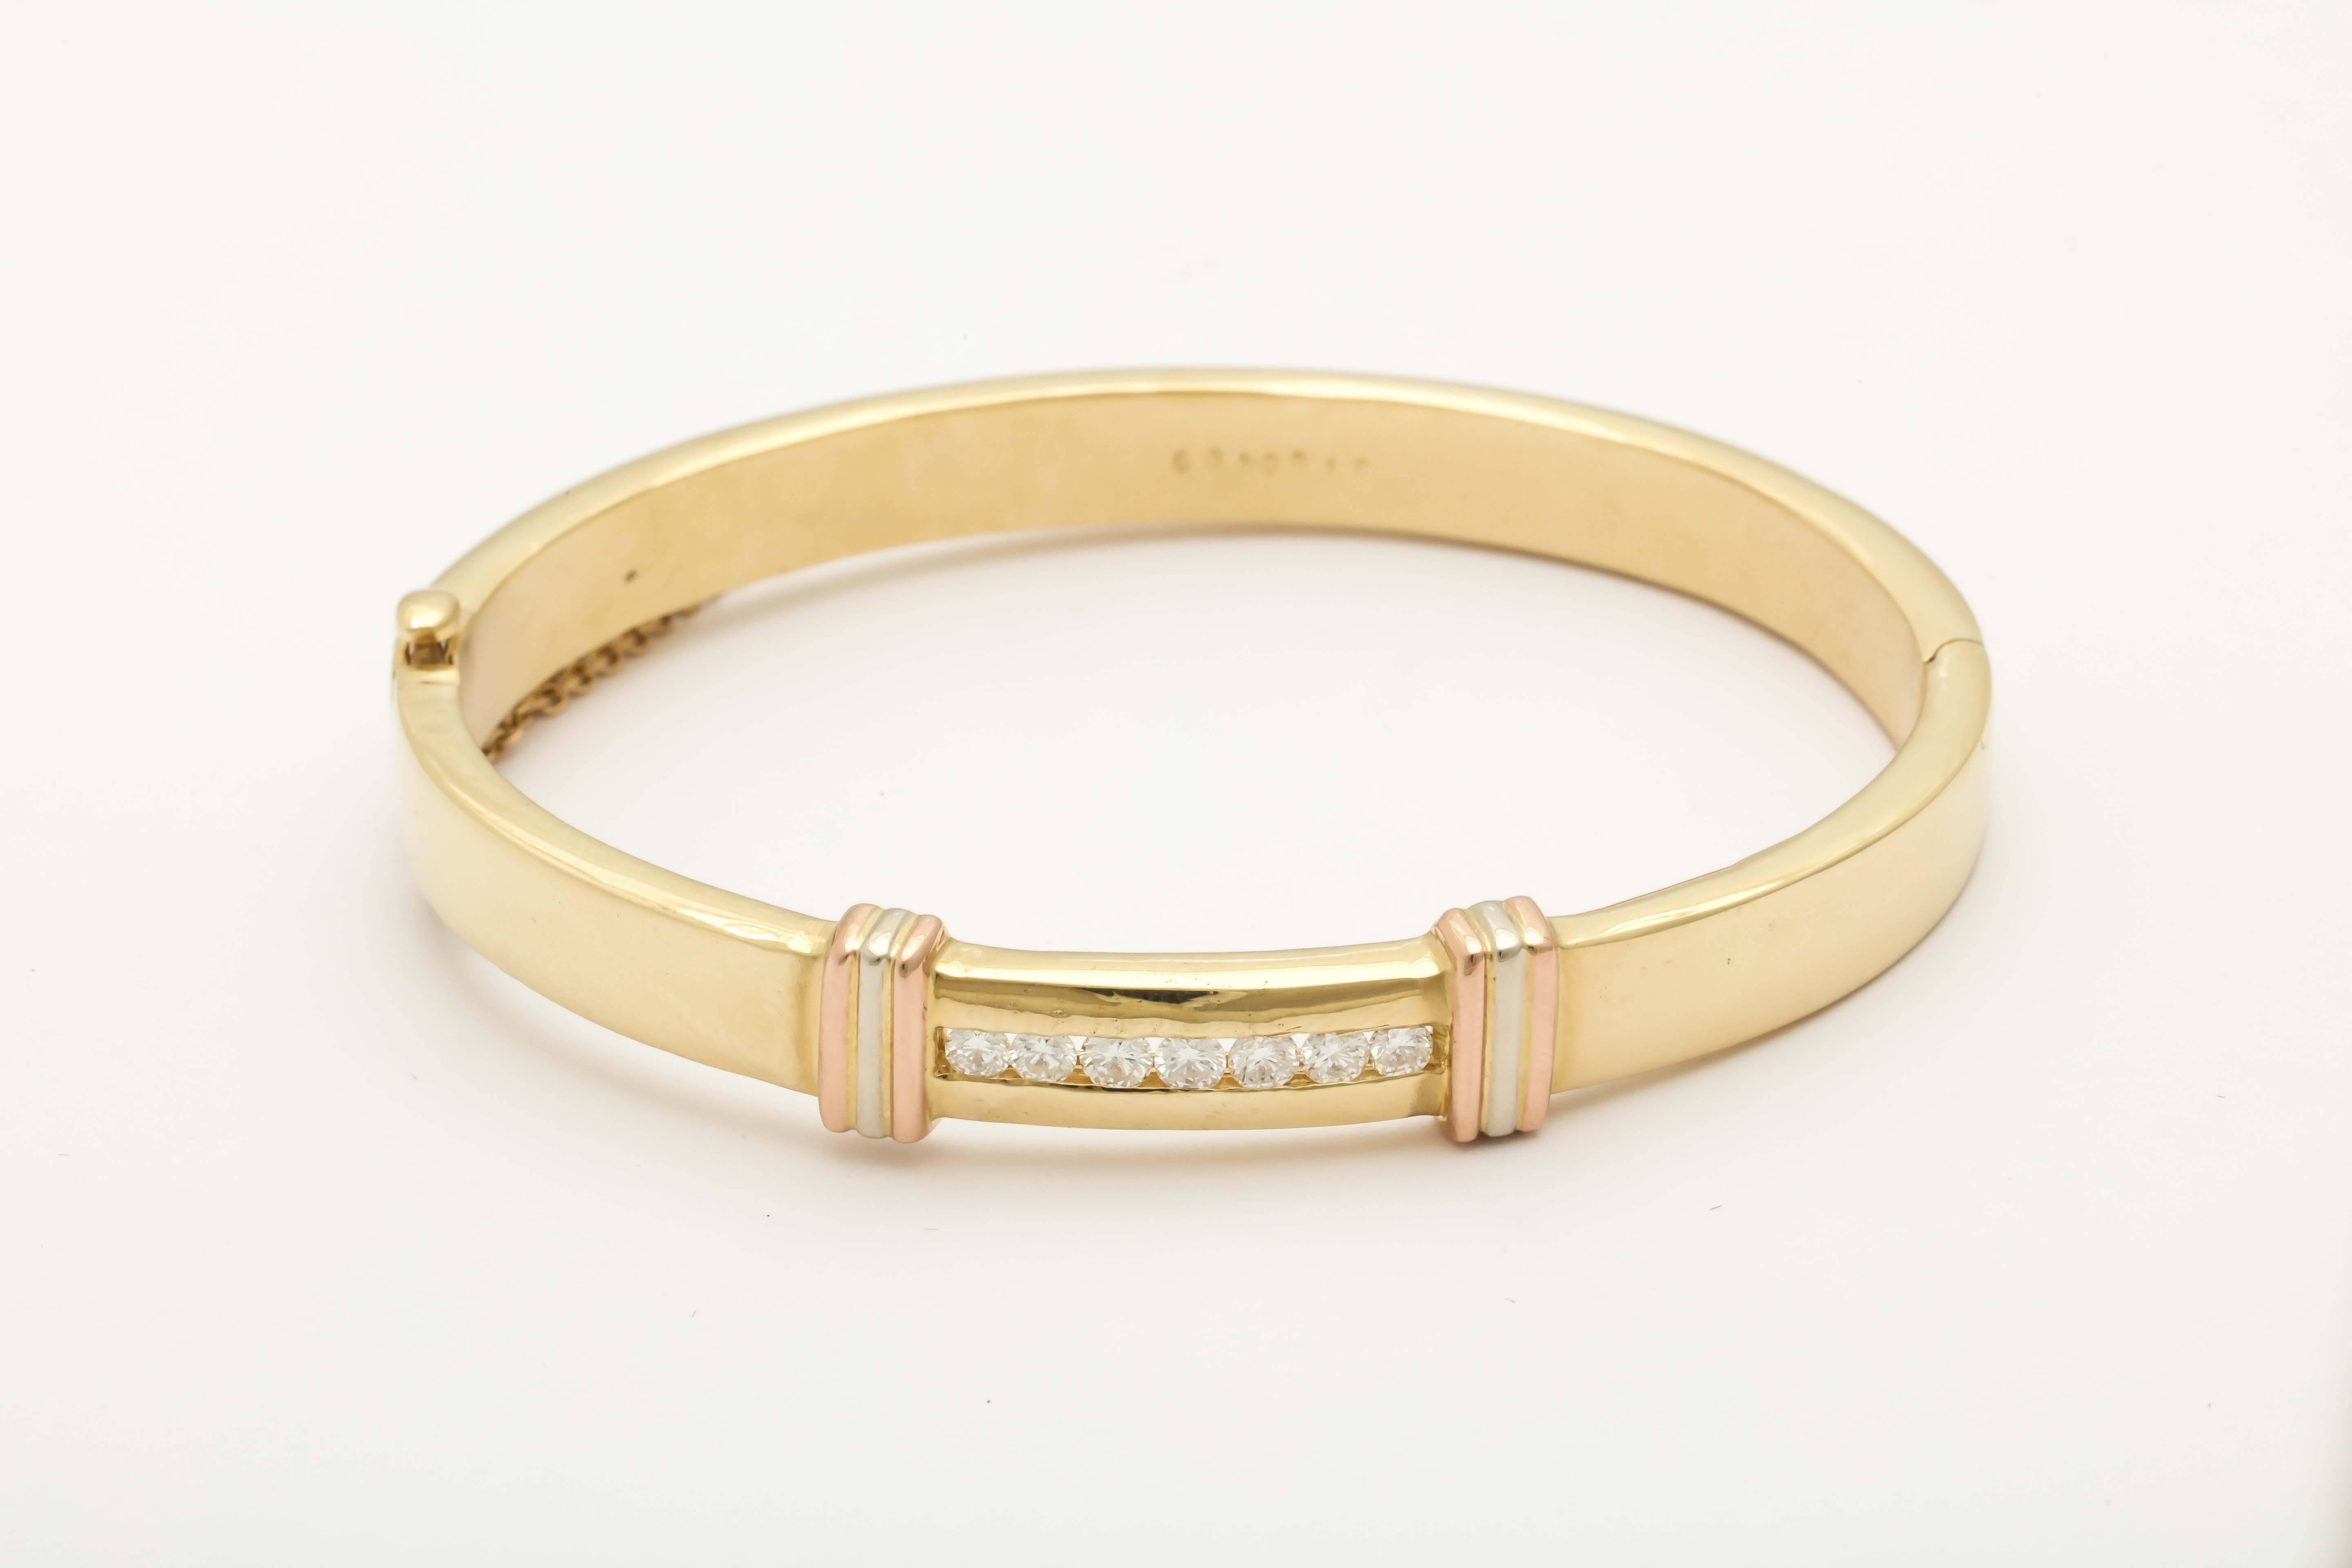 18kt Yellow,Pink,&White Gold Tri-Color Hinged Bangle Bracelet Designed With [8] Super High Quality Full Cut Invisible Set Diamonds. Bracelet Fits Standard Size Wrist And Is 2 & 1/4 Diameter Across. Fits An Average 7 Inch Wrist Size. Signed By